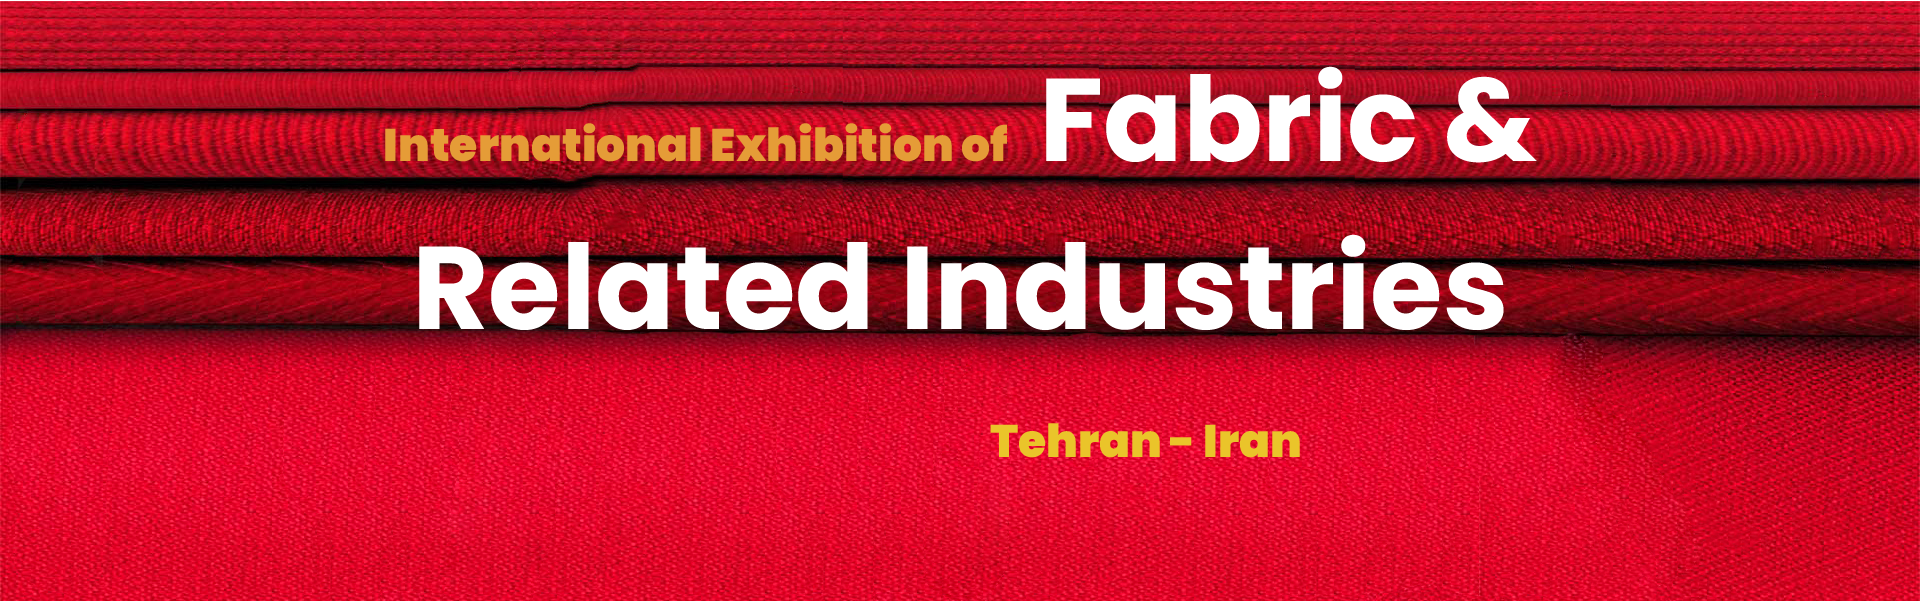 Textile and Fabric Industry Exhibition Tehran